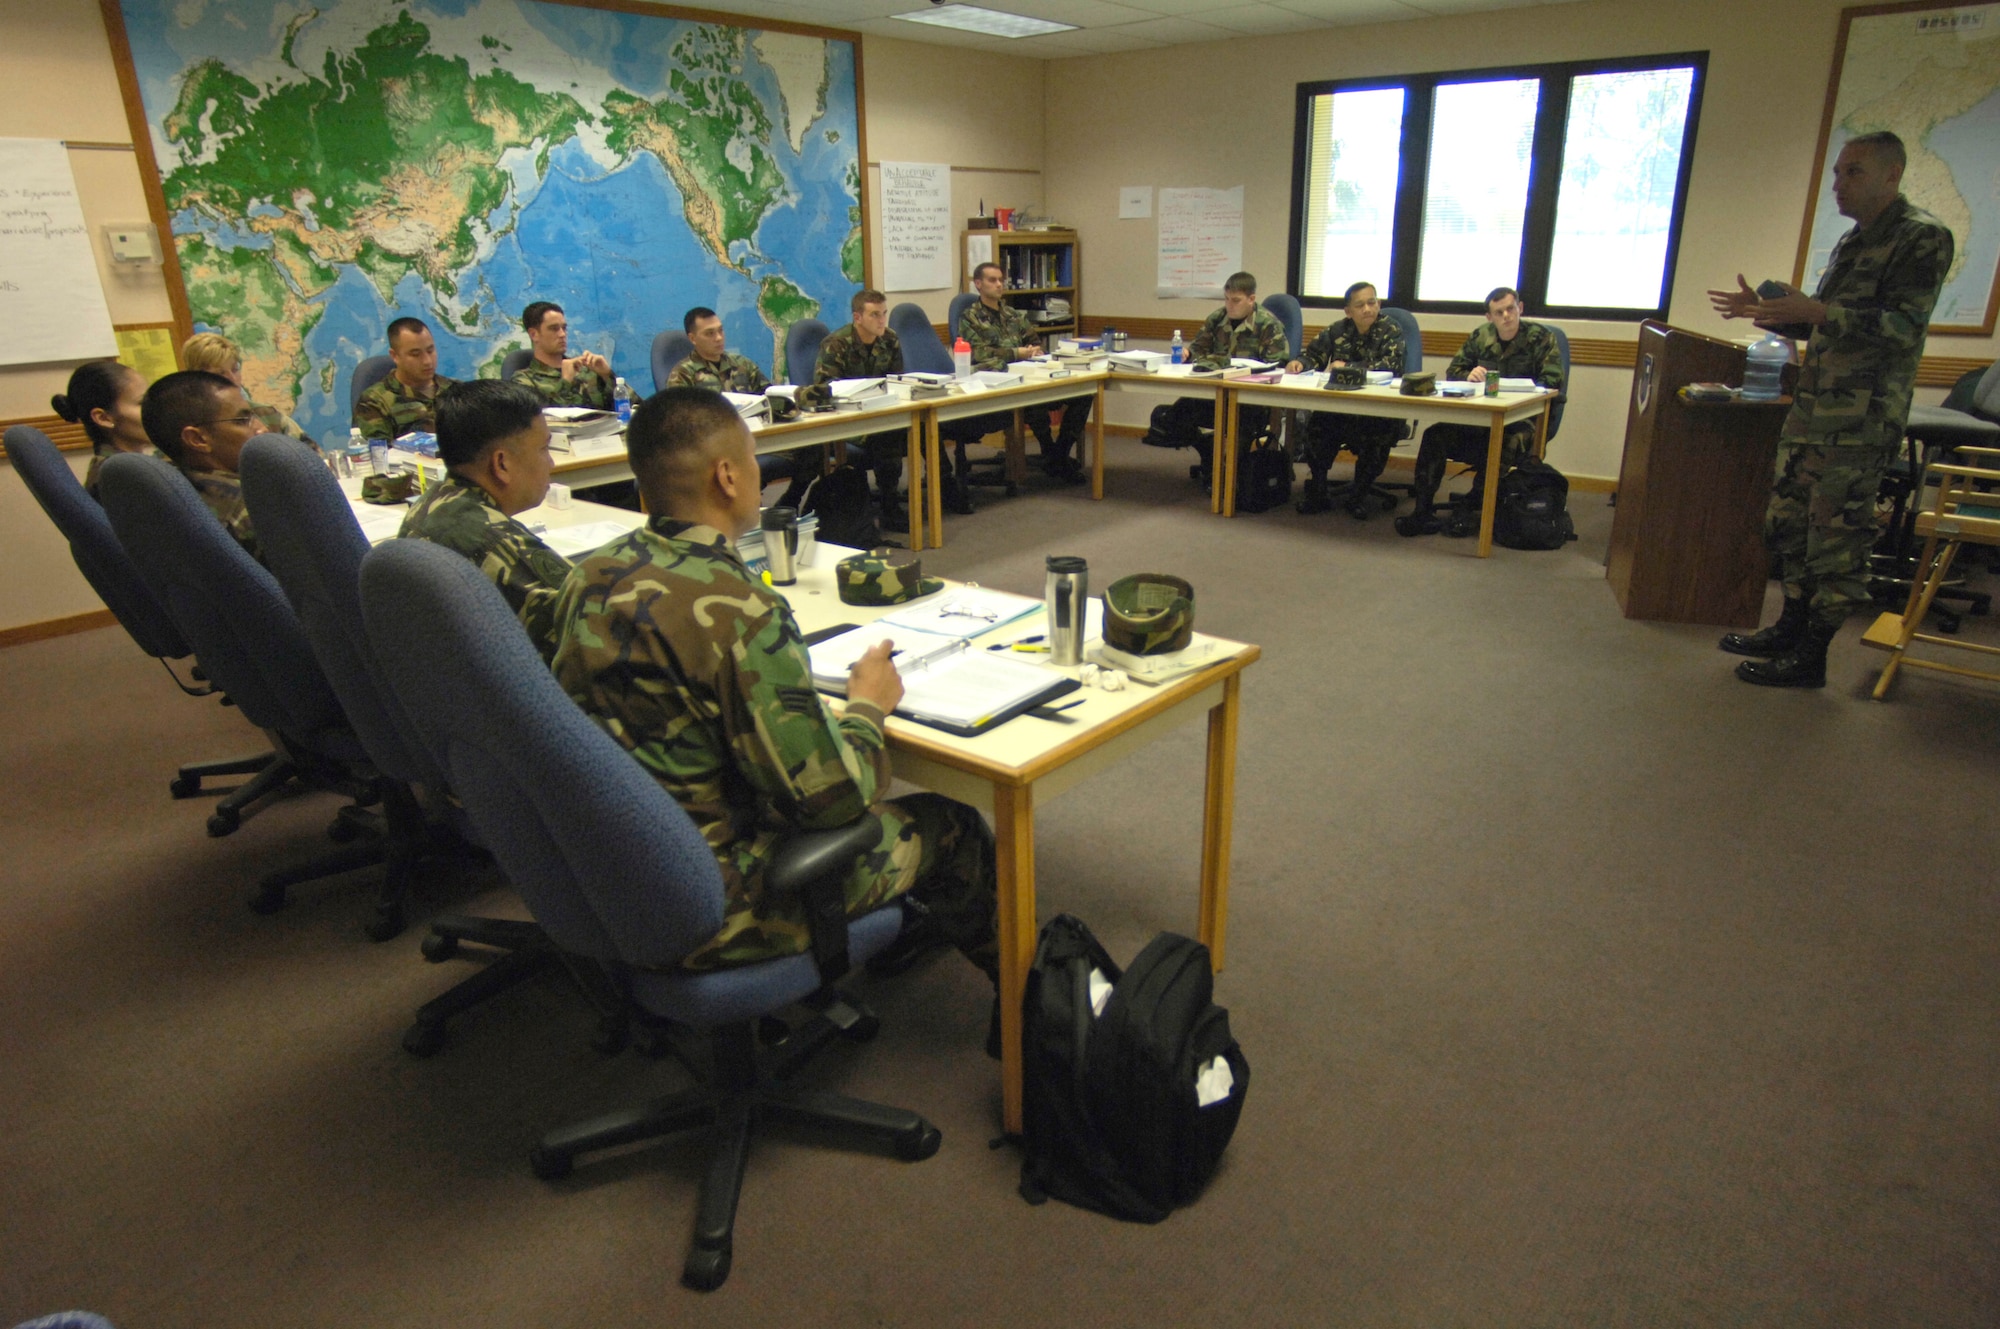 HICKAM AIR FORCE BASE, Hawaii -- Master Sgt. Todd Joiner lectures on enlisted feedback during an Airman Leadership School class Tuesday, March 7, 2006, at Hickam Air Force Base, Hawaii. This class marks the first time Philippine Air Force students are attending the course. They will take back the lessons learned and develop their own leadership course within the Philippine Air Force. Sergeant Joiner is an instructor at the Hickam Professional Military Education Center.